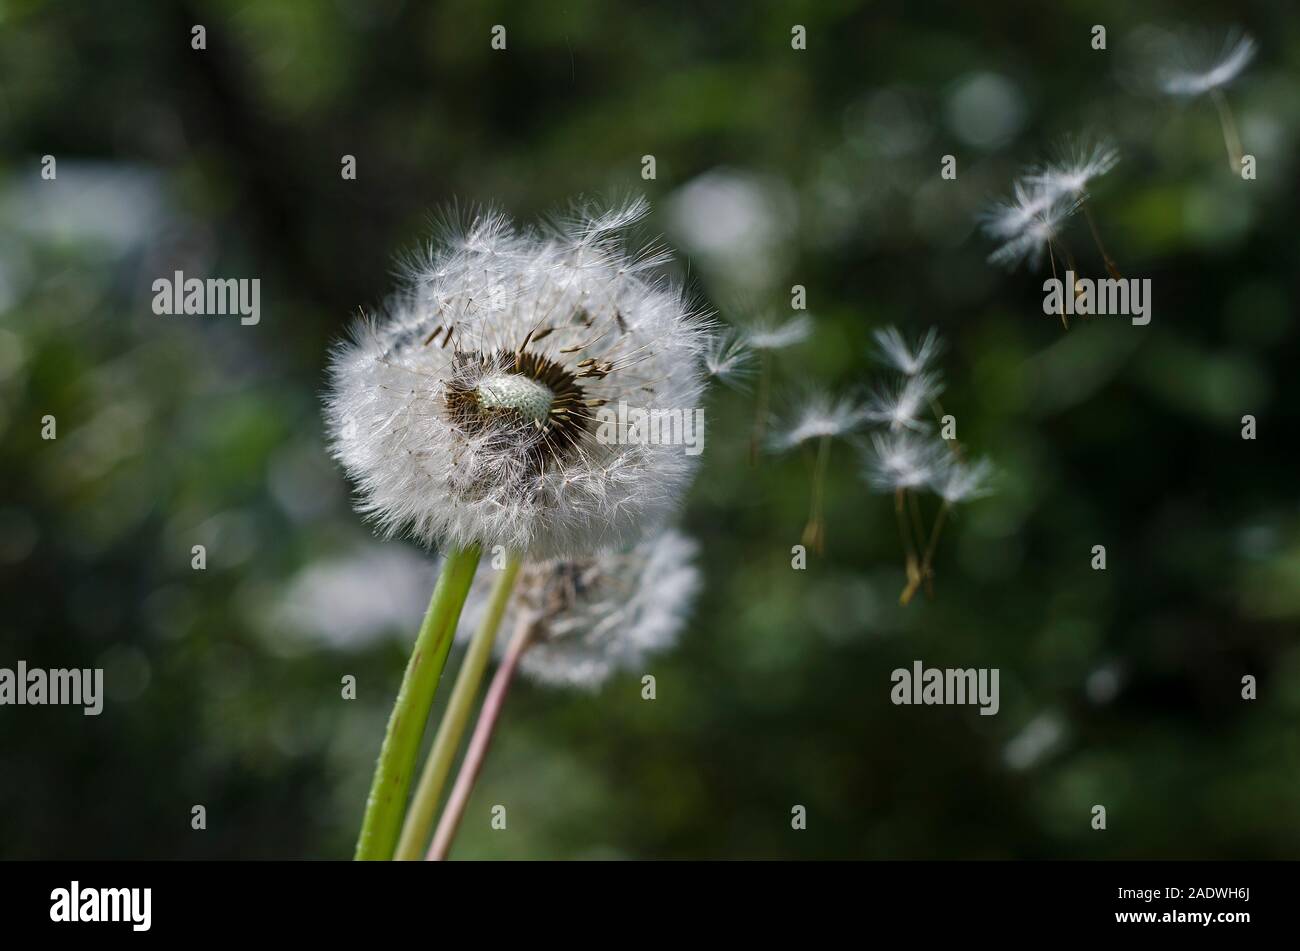 Dandelion with seeds flying in the wind against a natural green background.Summer, maturity. Stock Photo